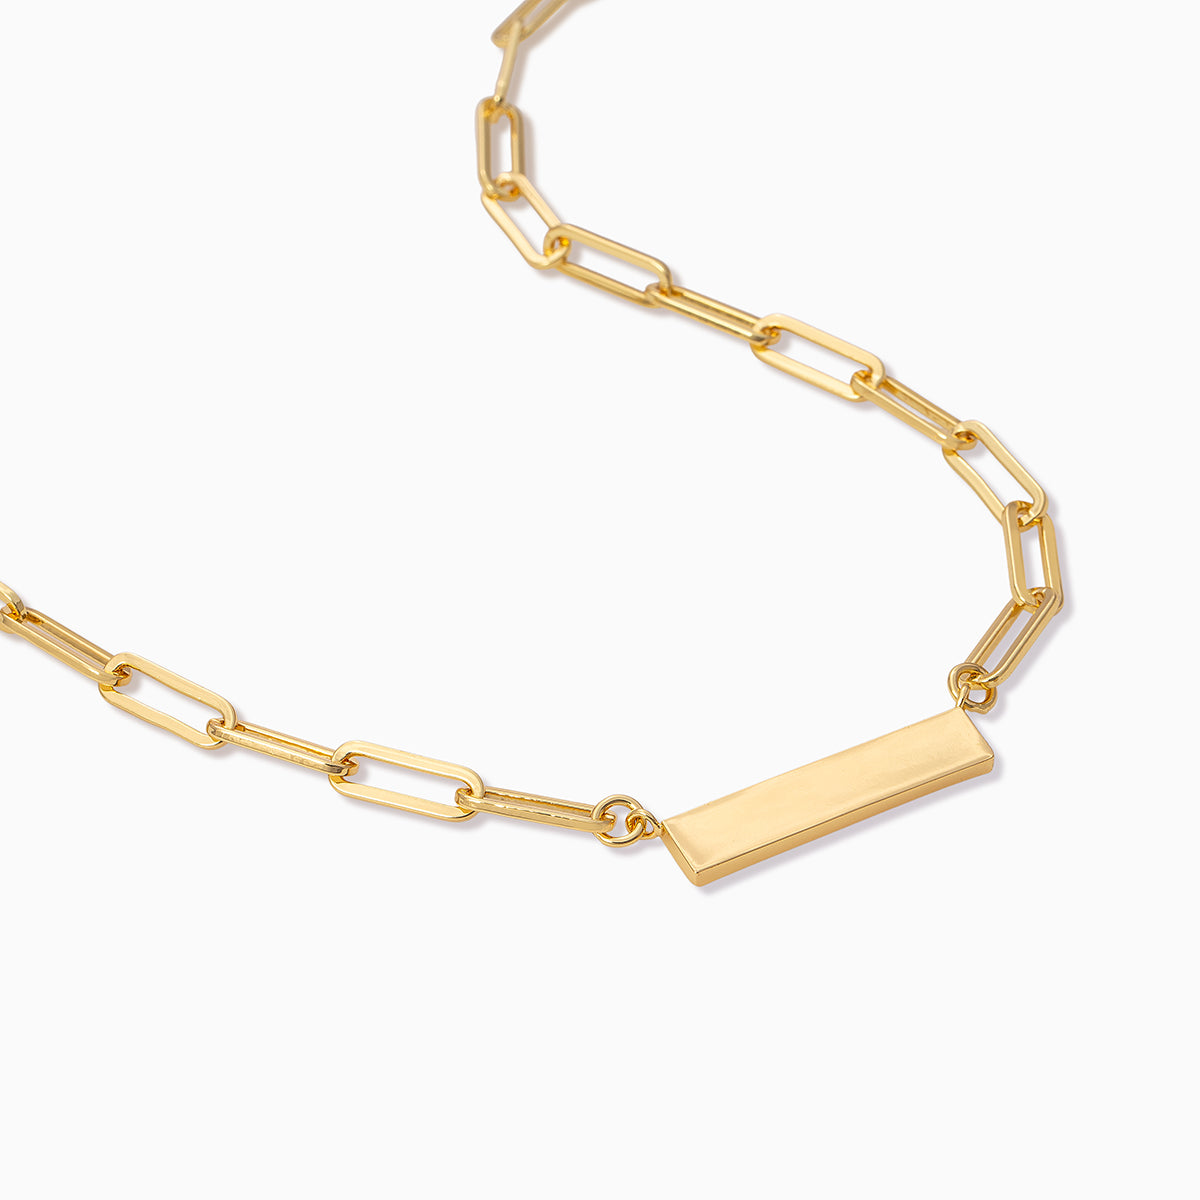 Gold Chain and Bar Personalized Engravable Necklace | Uncommon James